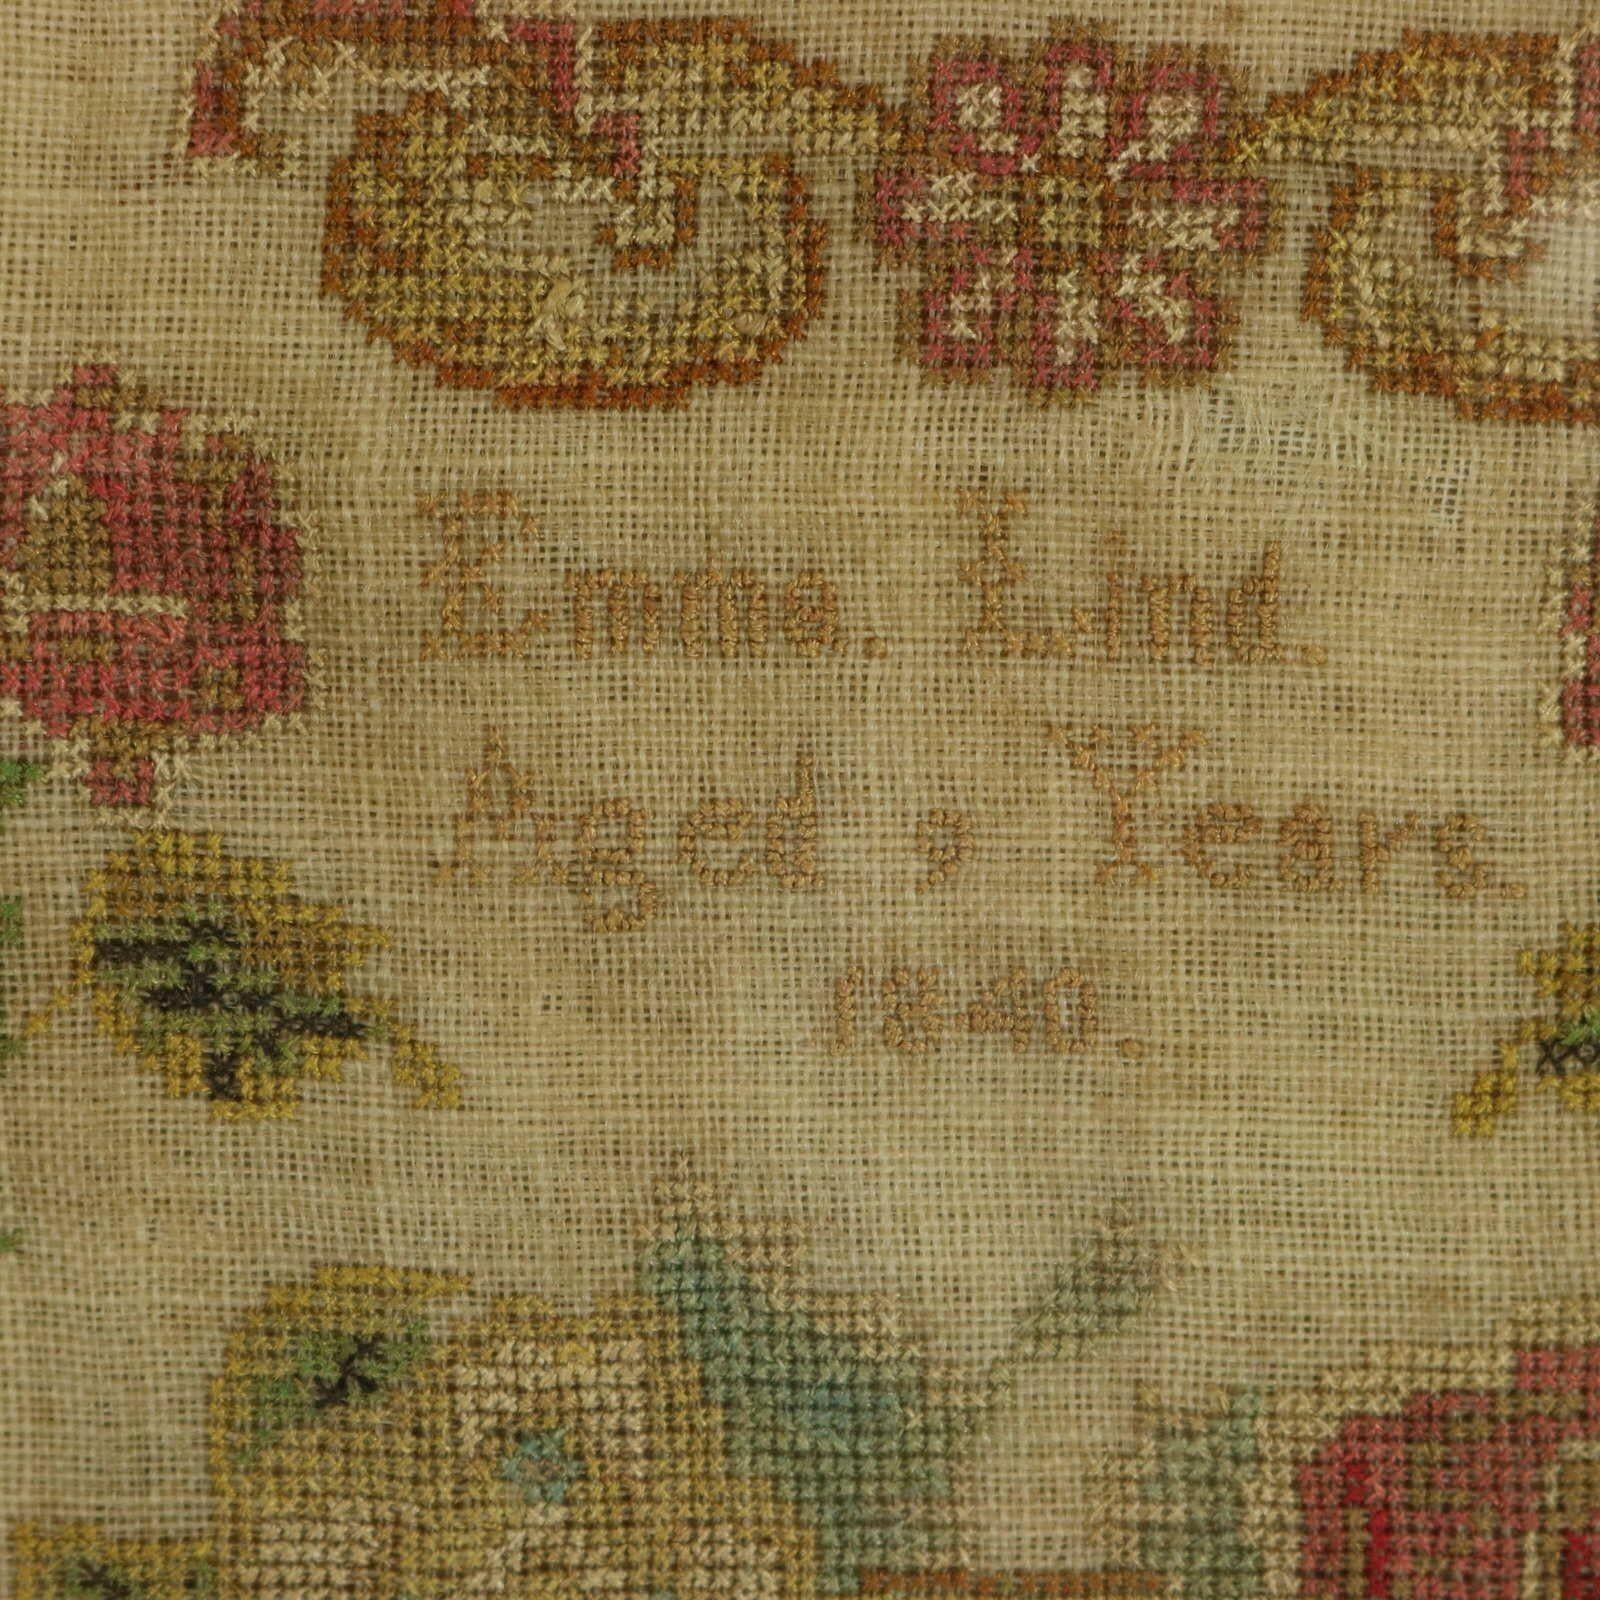 Mid-19th Century Antique Sampler, 1840, by Emma Lind